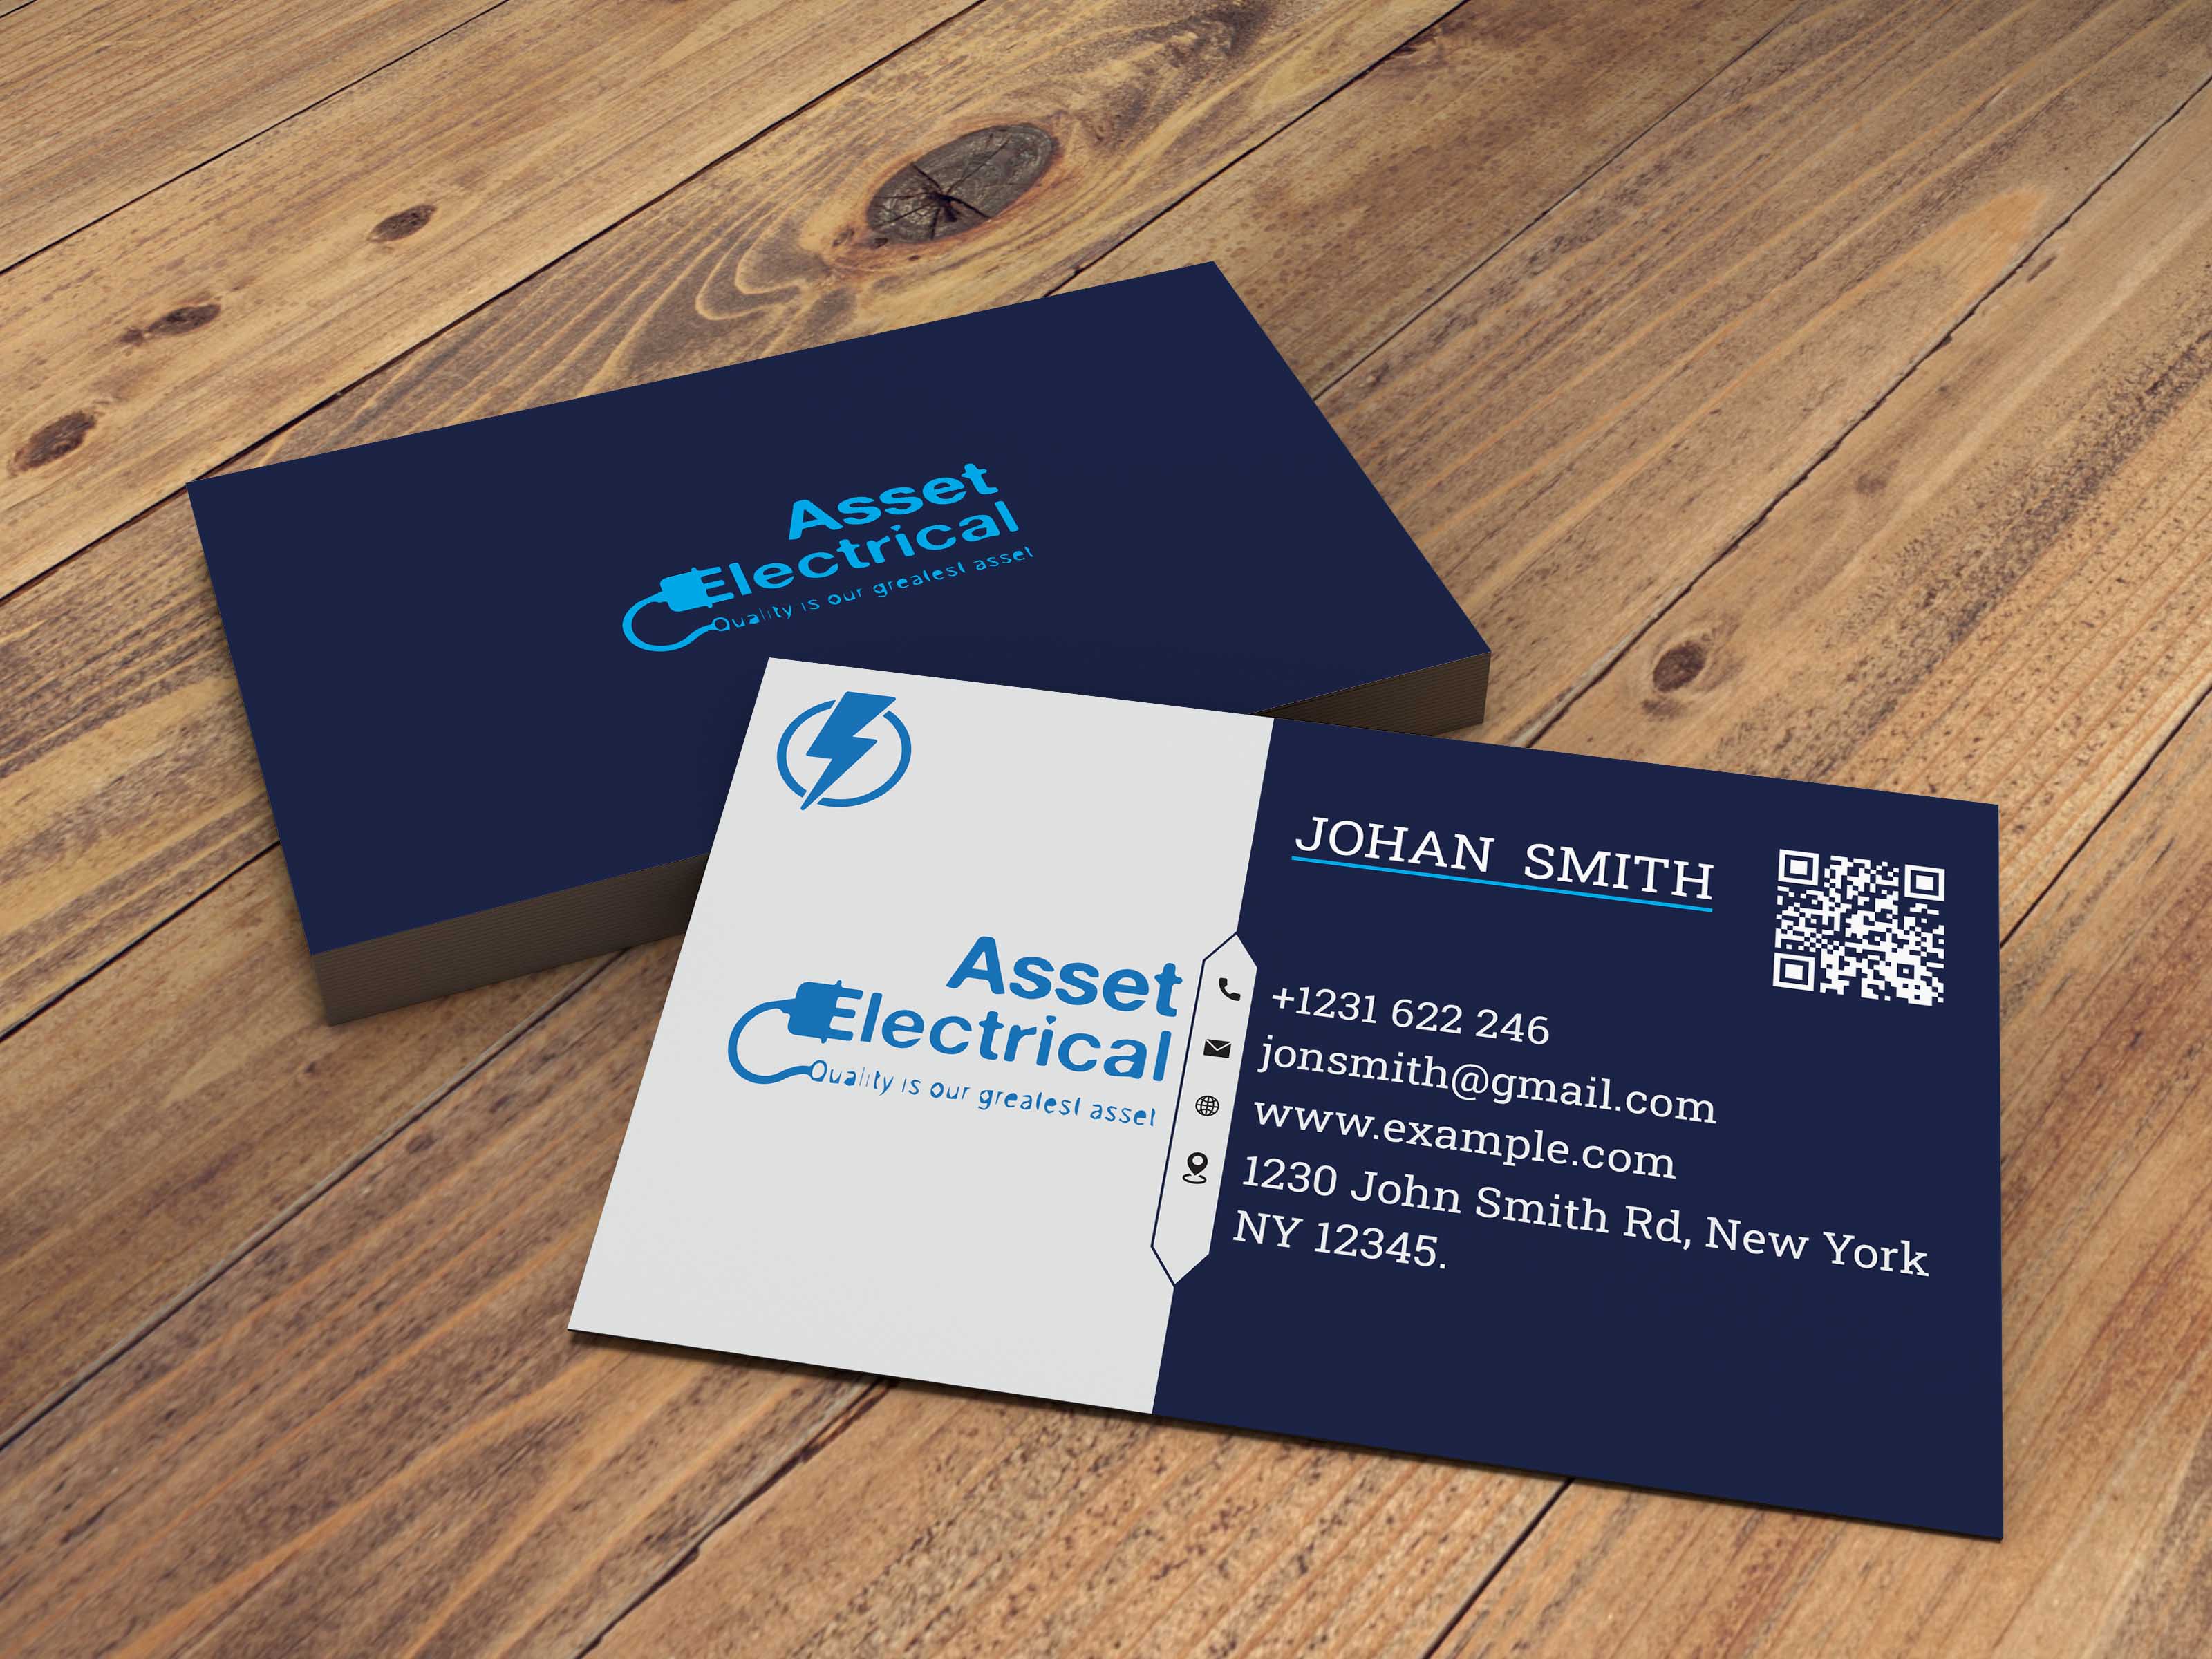 I will design an outstanding business card